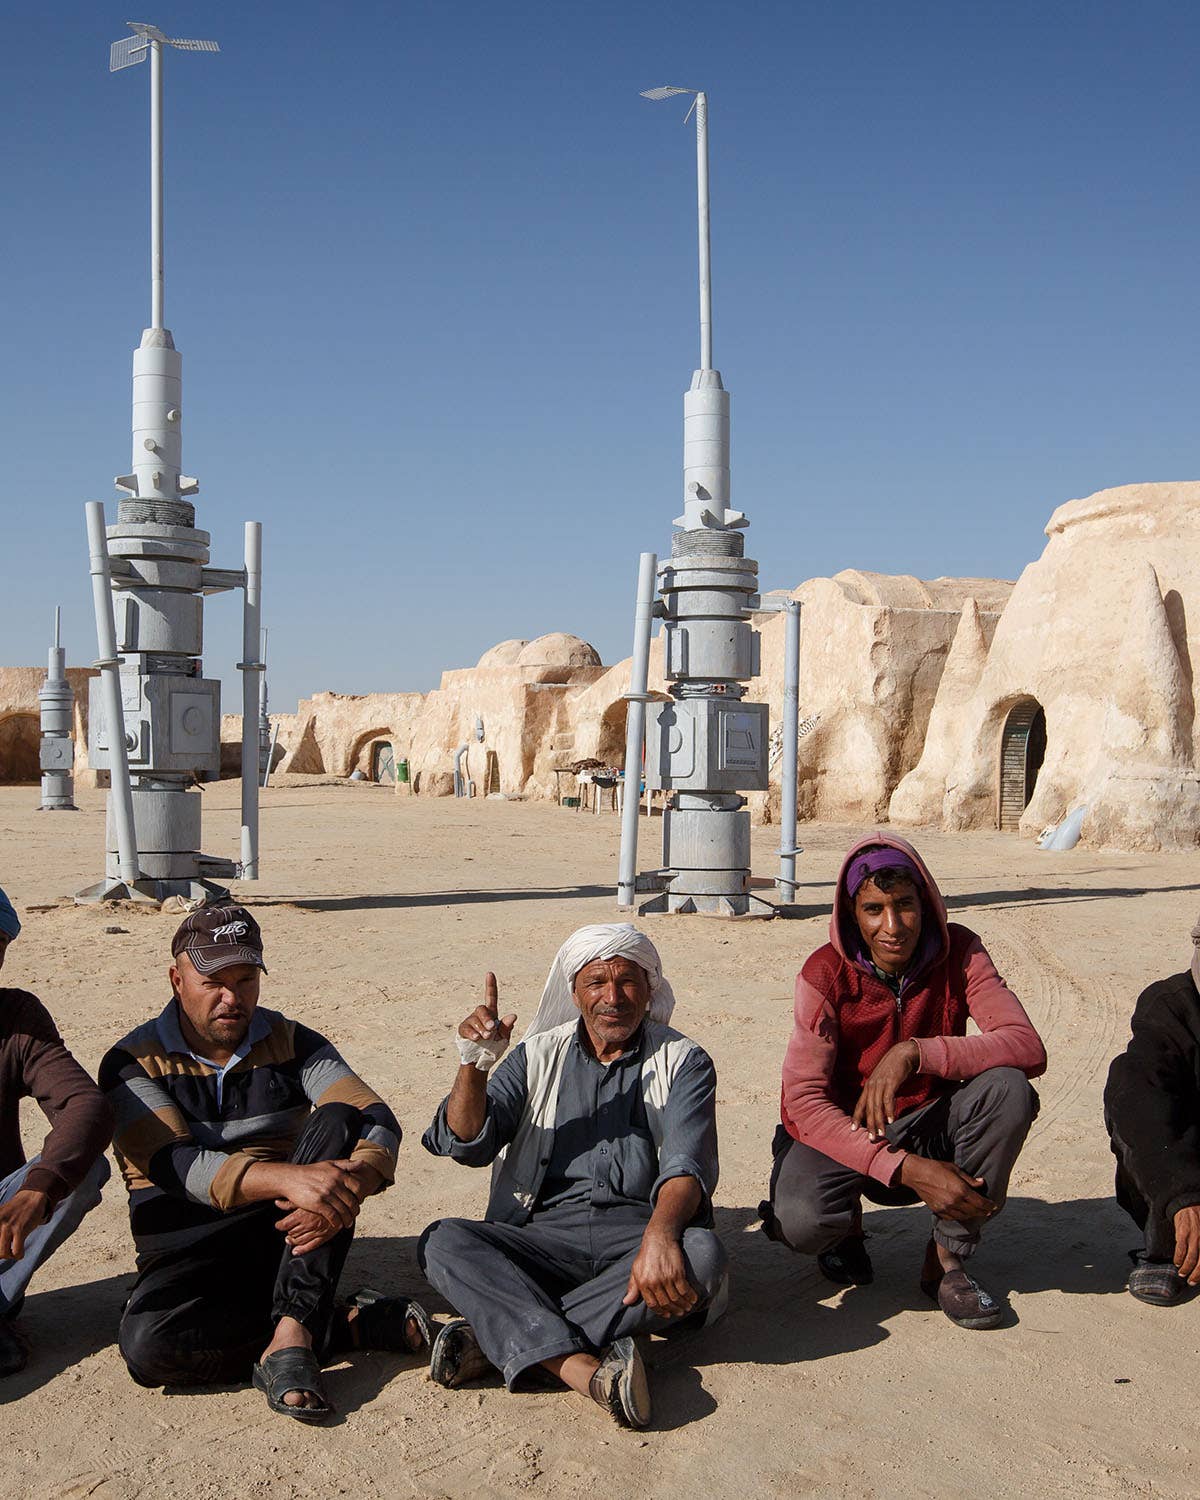 That Time We Stumbled on Some Guys Cooking Lunch on Tatooine